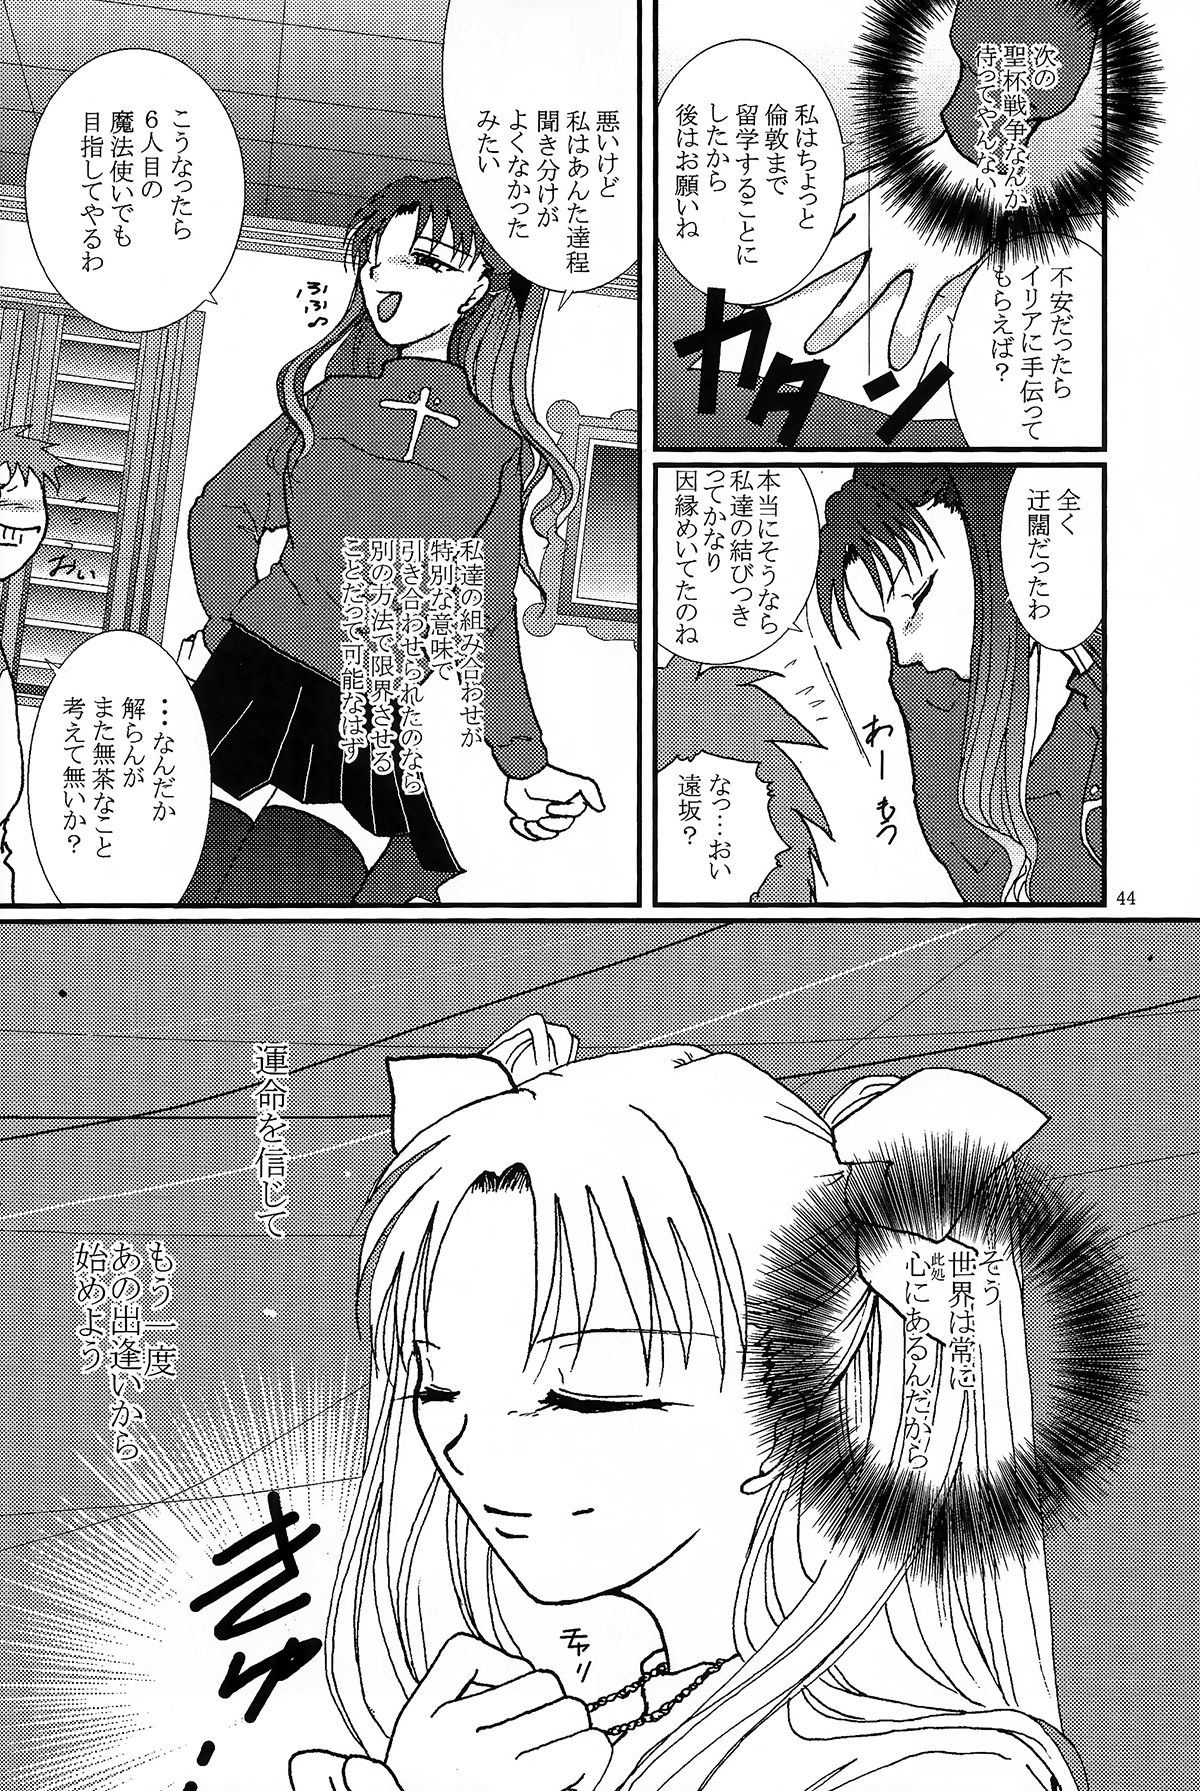 (SC24) [Takeda Syouten (Takeda Sora)] Question-7 (Fate/stay night) page 42 full